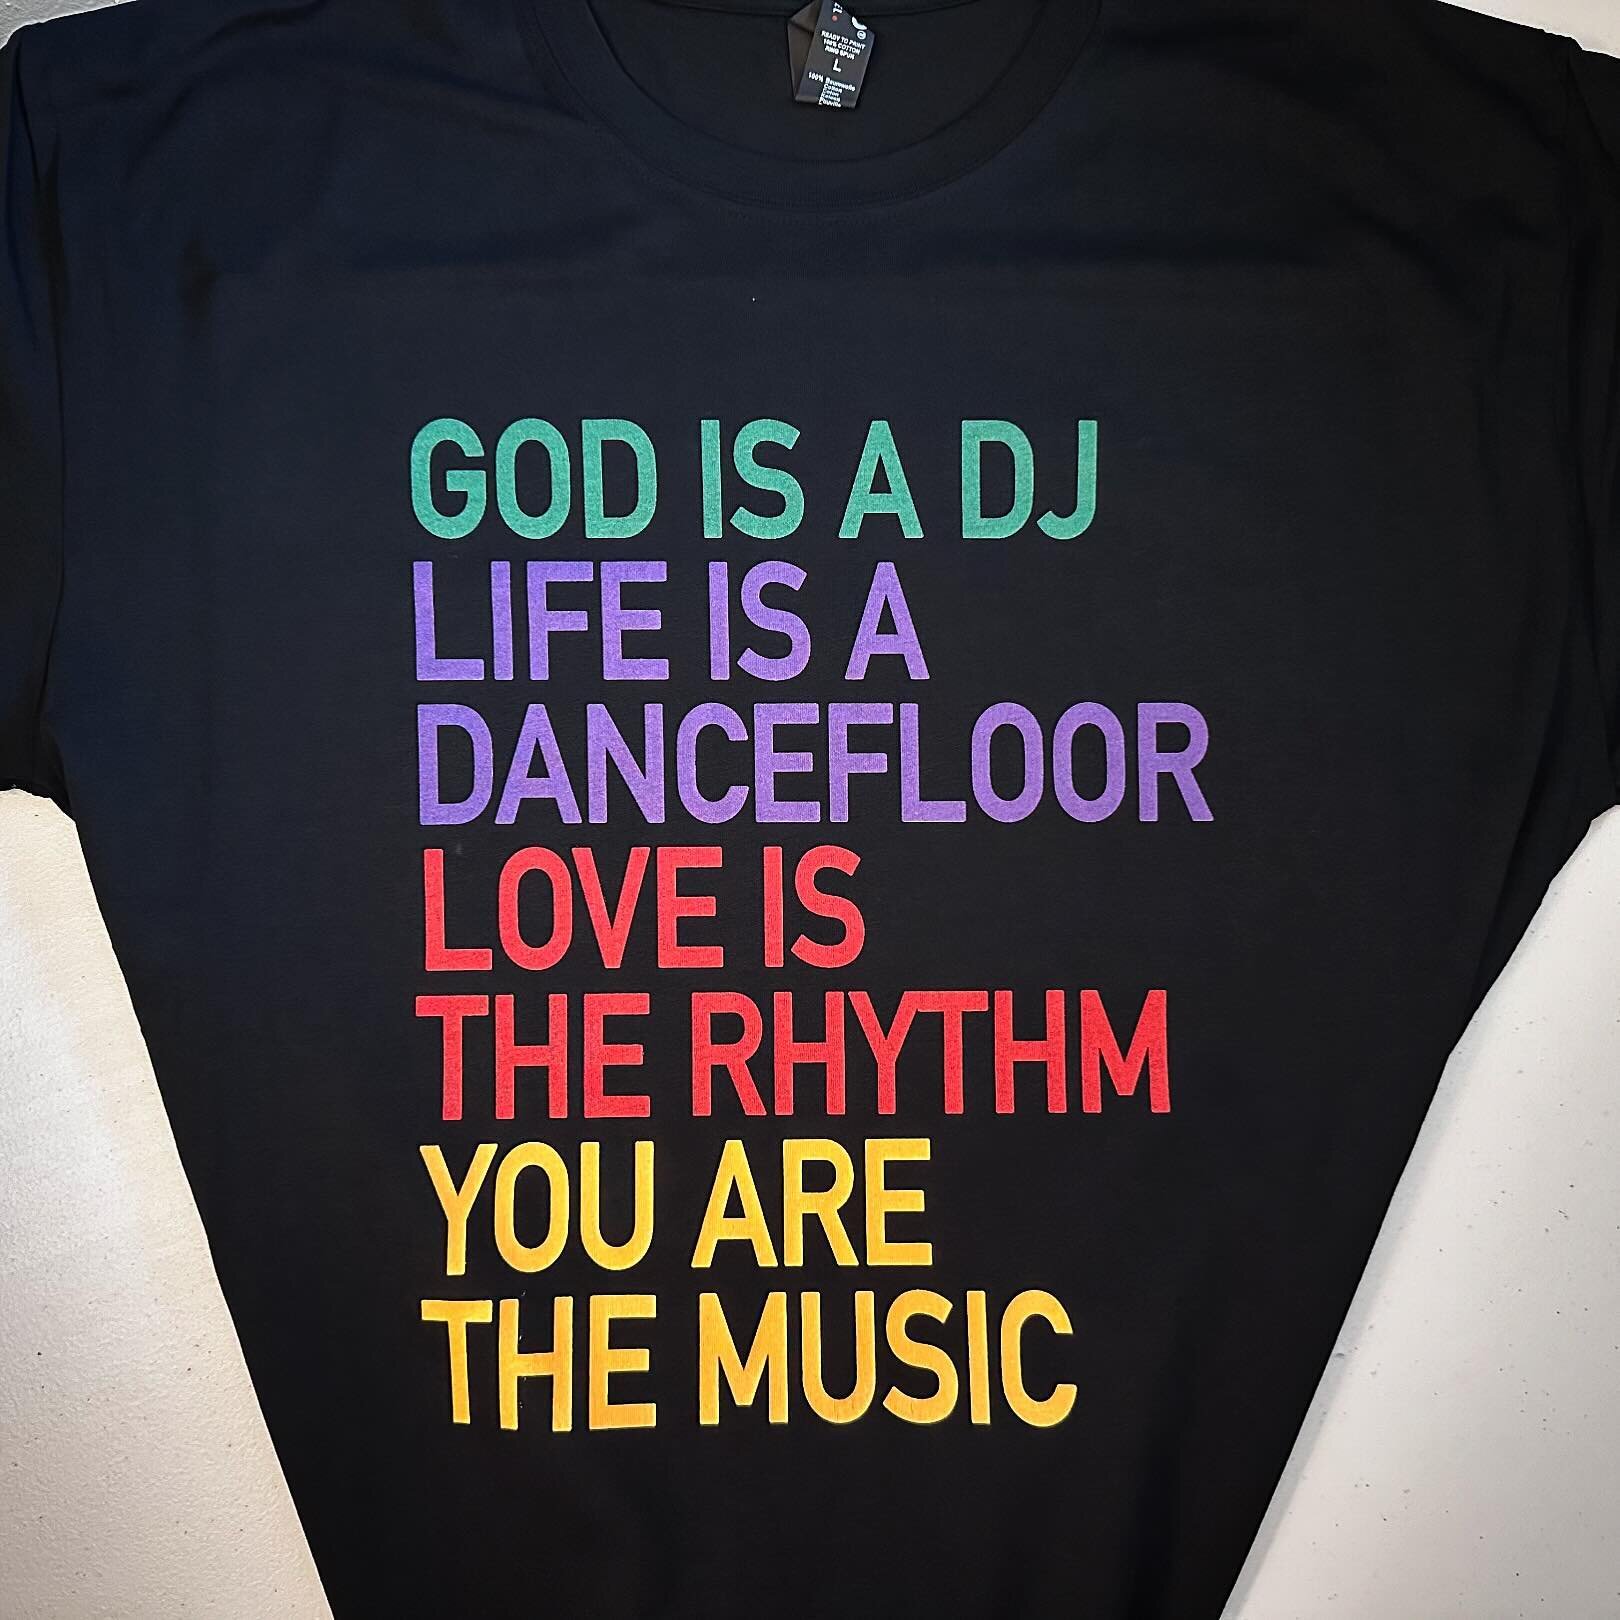 New Shop Addition .
.
God Is A DJ
Life Is A Dancefloor
Love Is The Rhythm 
You Are The Music 
.
Black Short Sleeve Tee 
.
Shop link in bio .
#dj #dance #dancemusic #dancefloor #god #music #dancing #rhythm #tshirt #tshirtdesign #tshirtprinting